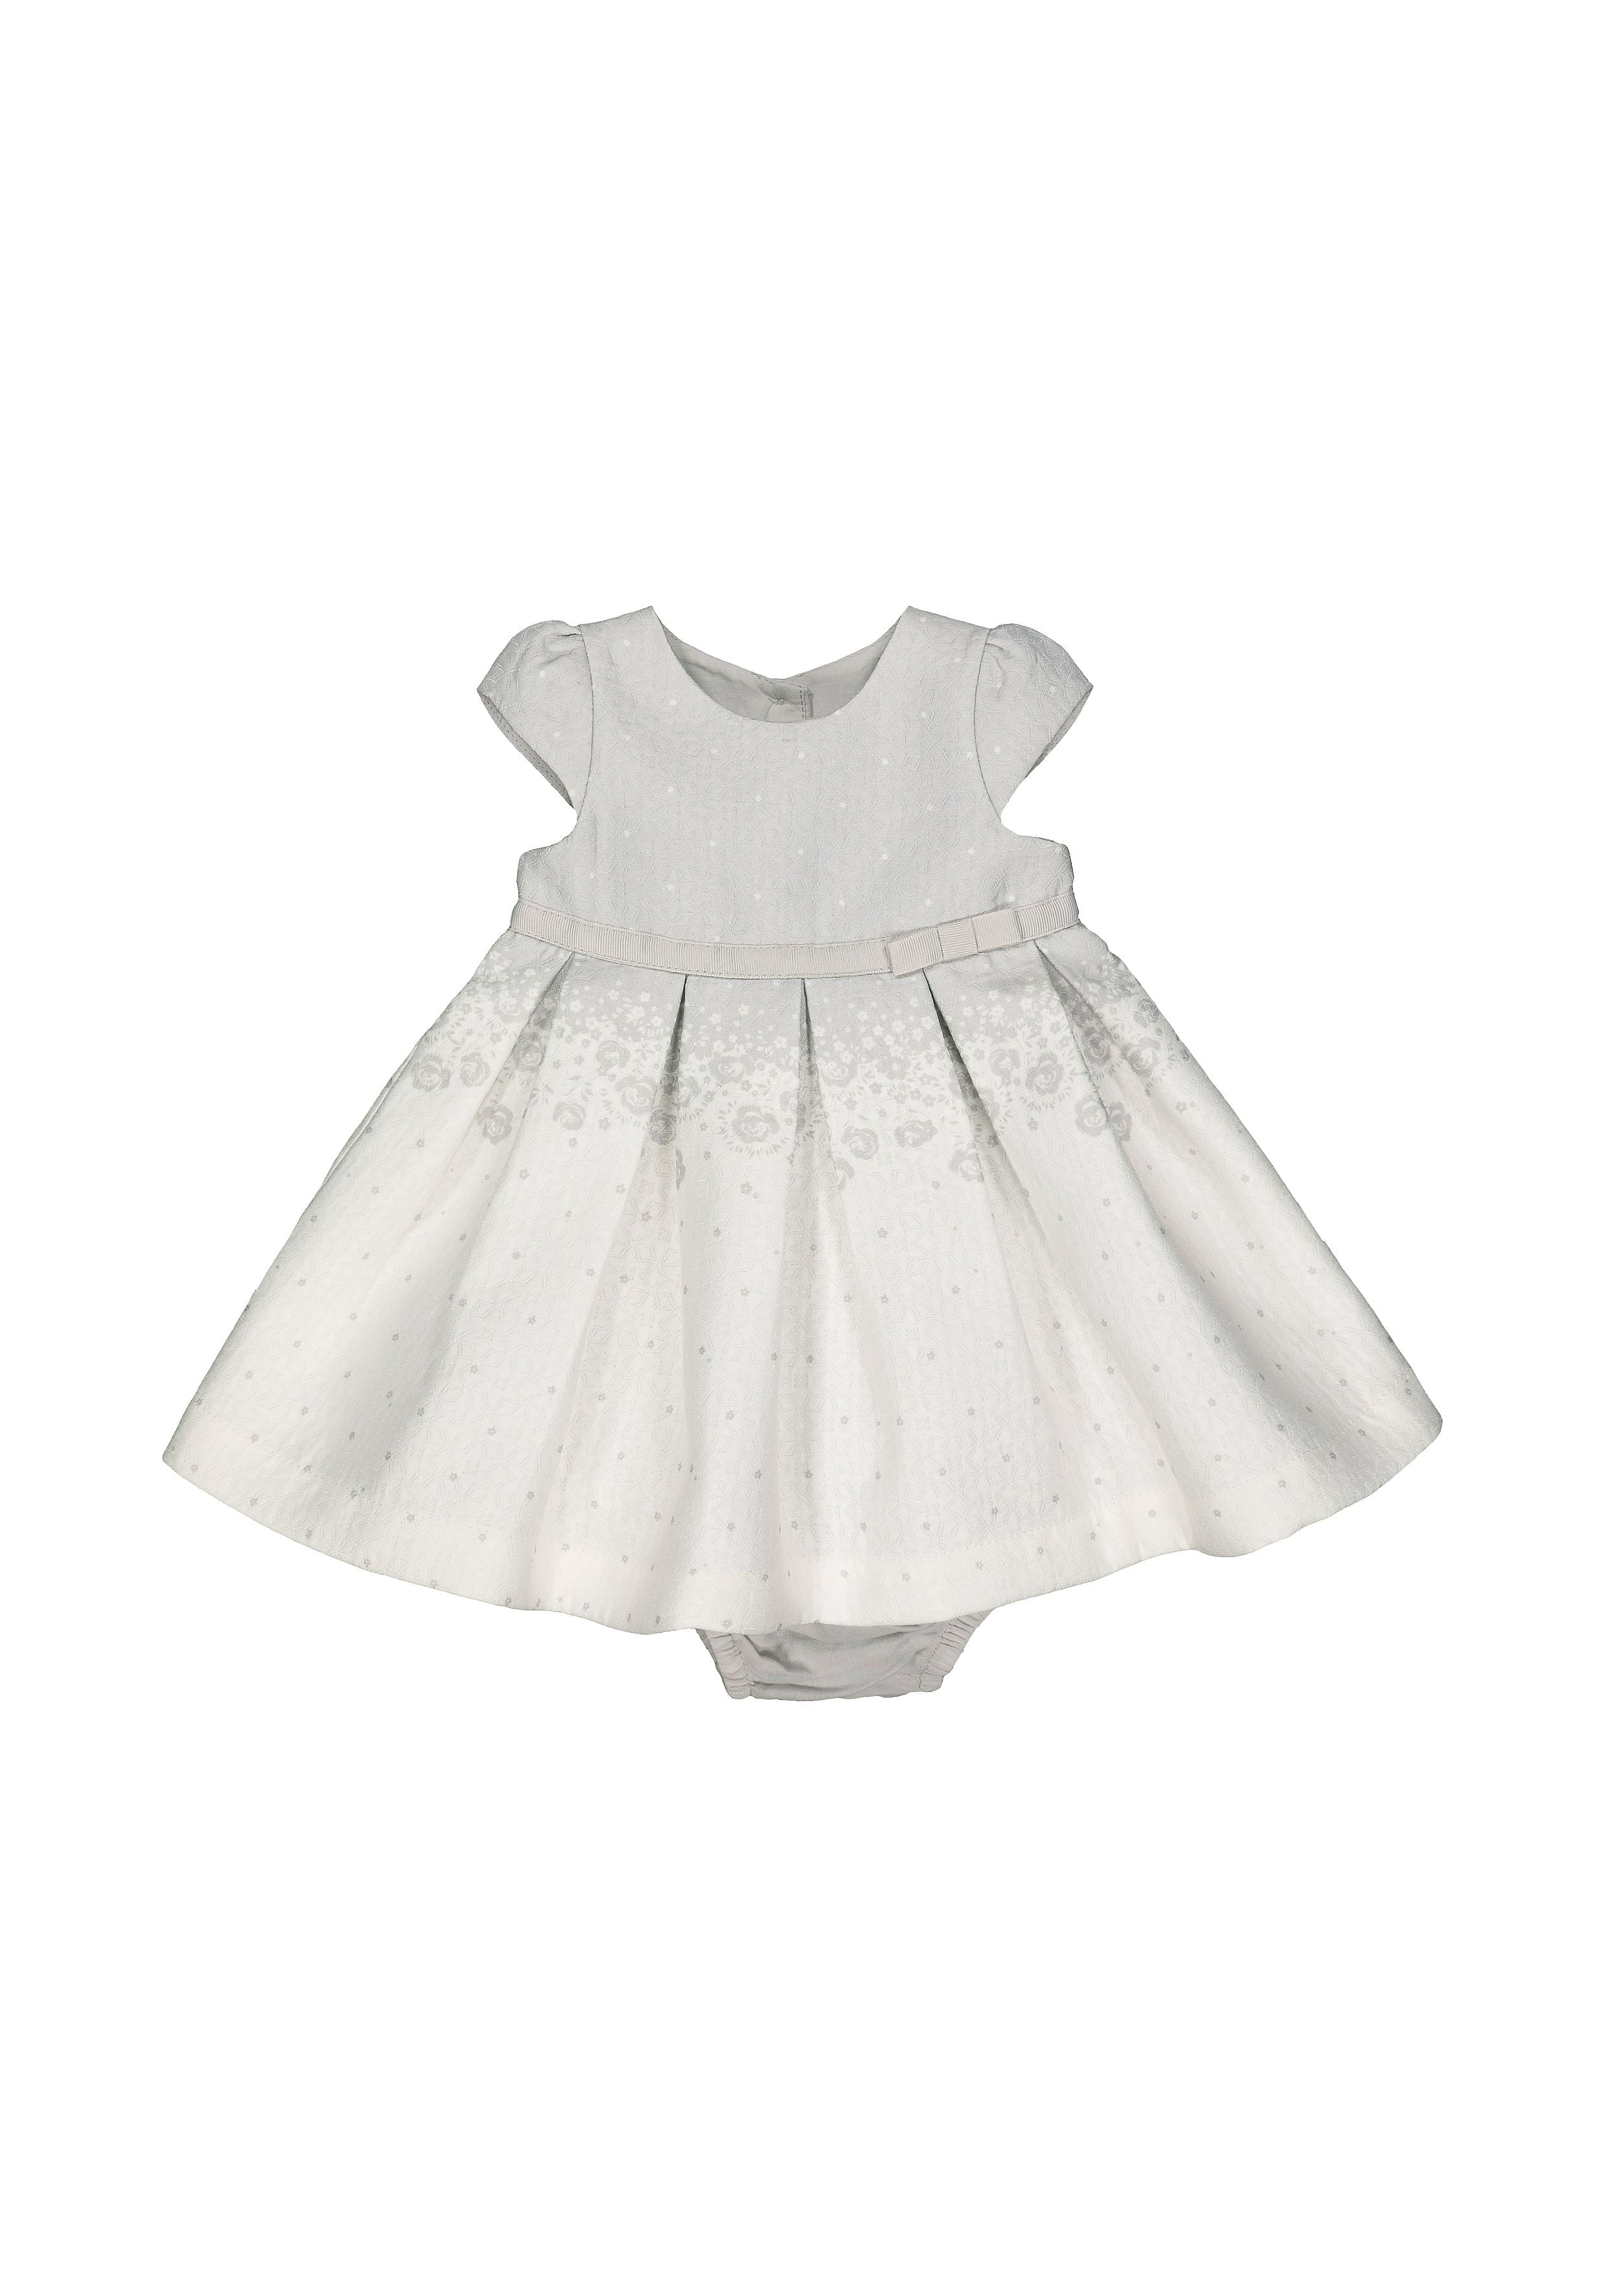 Mothercare | White and Grey Printed Dress 0